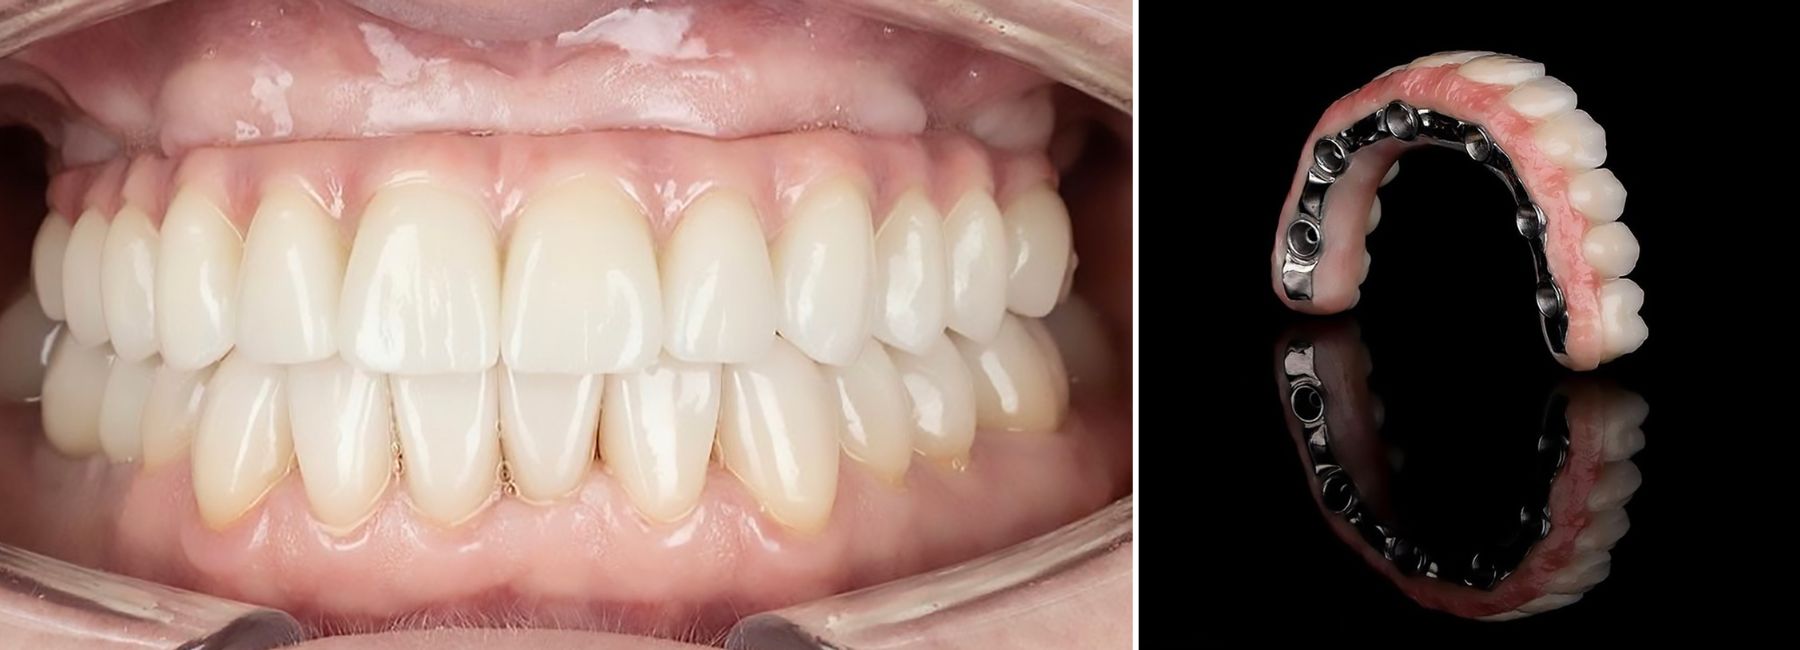 Full mouth implant reconstructions